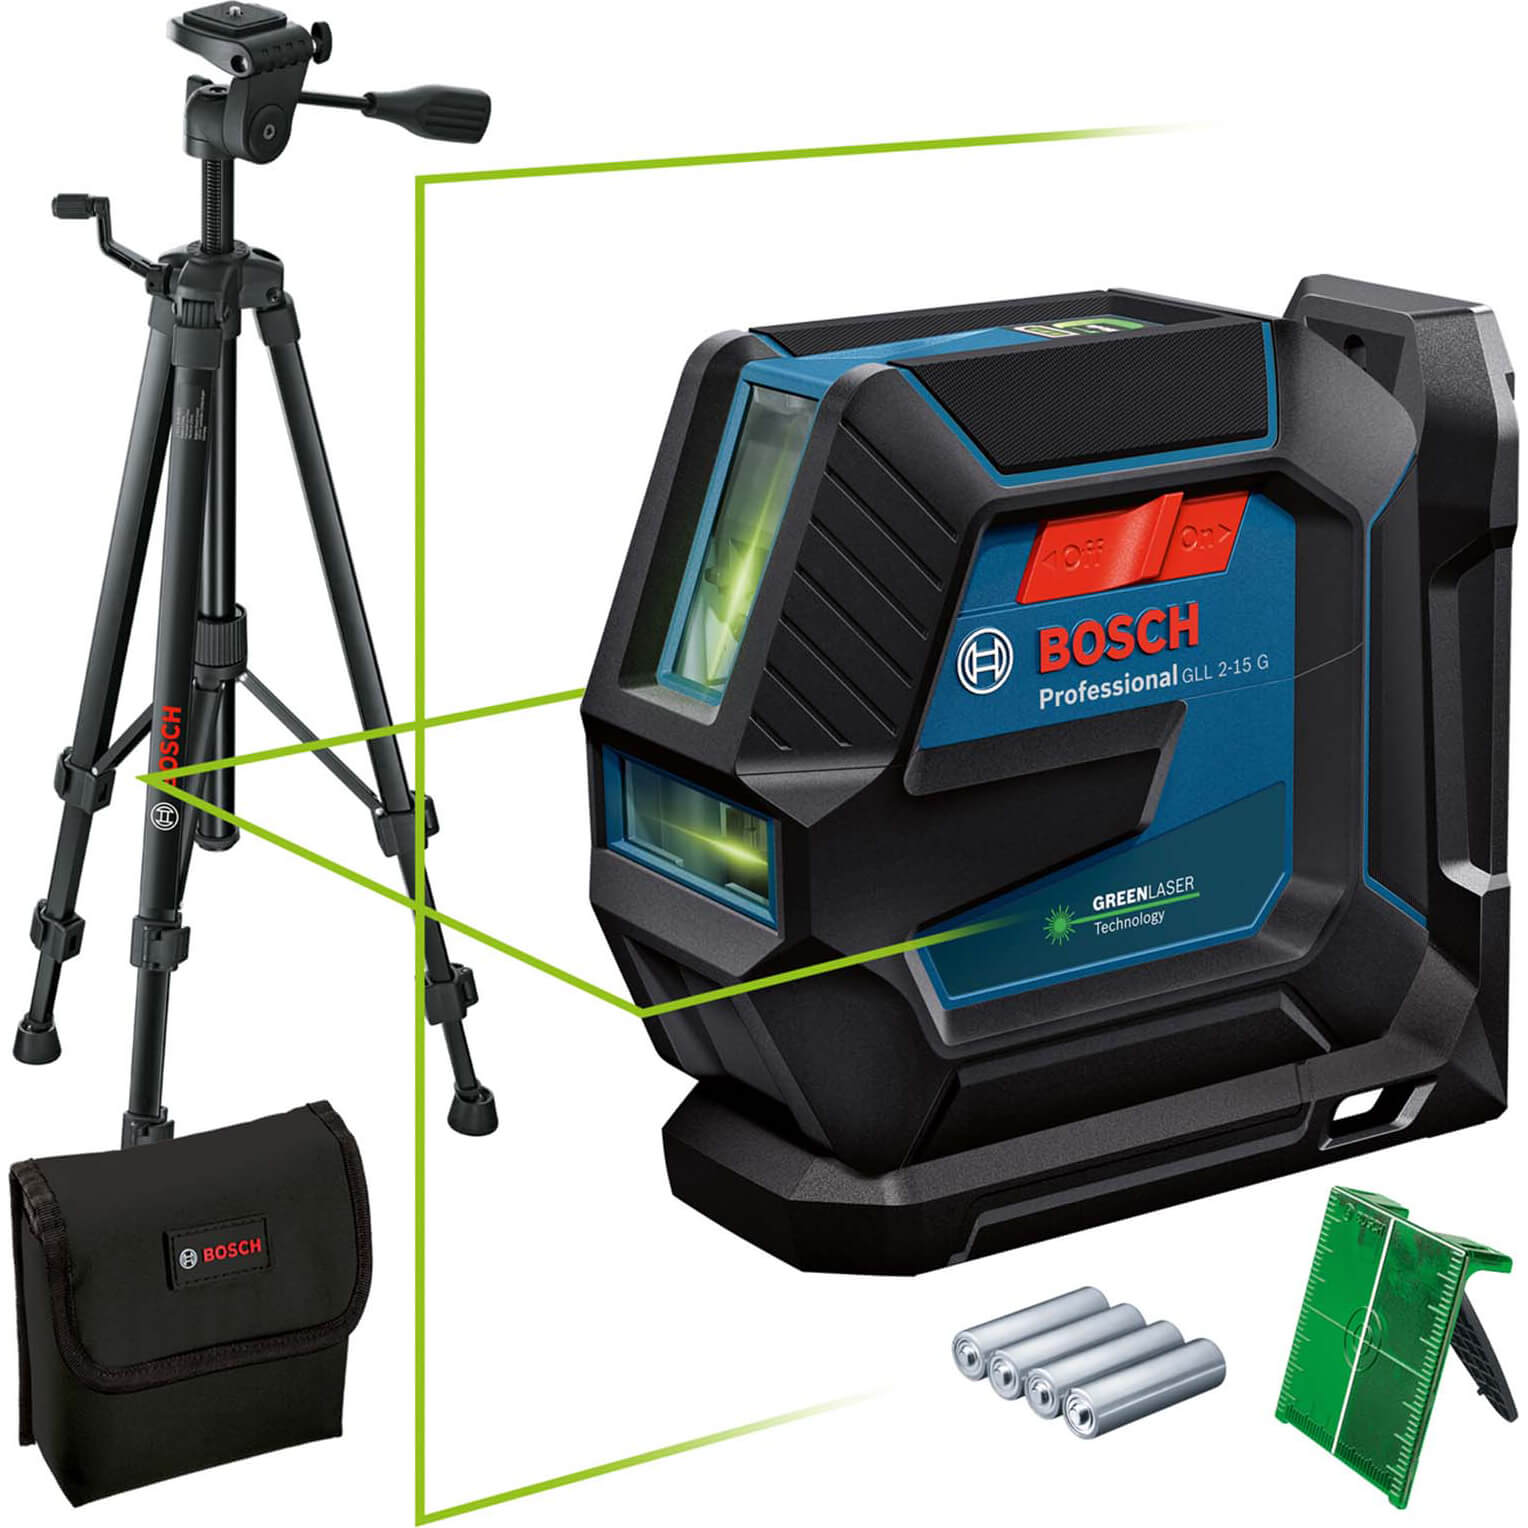 Photo of Bosch Gll 2-15 G Green Beam Line Laser Level And Tripod Set